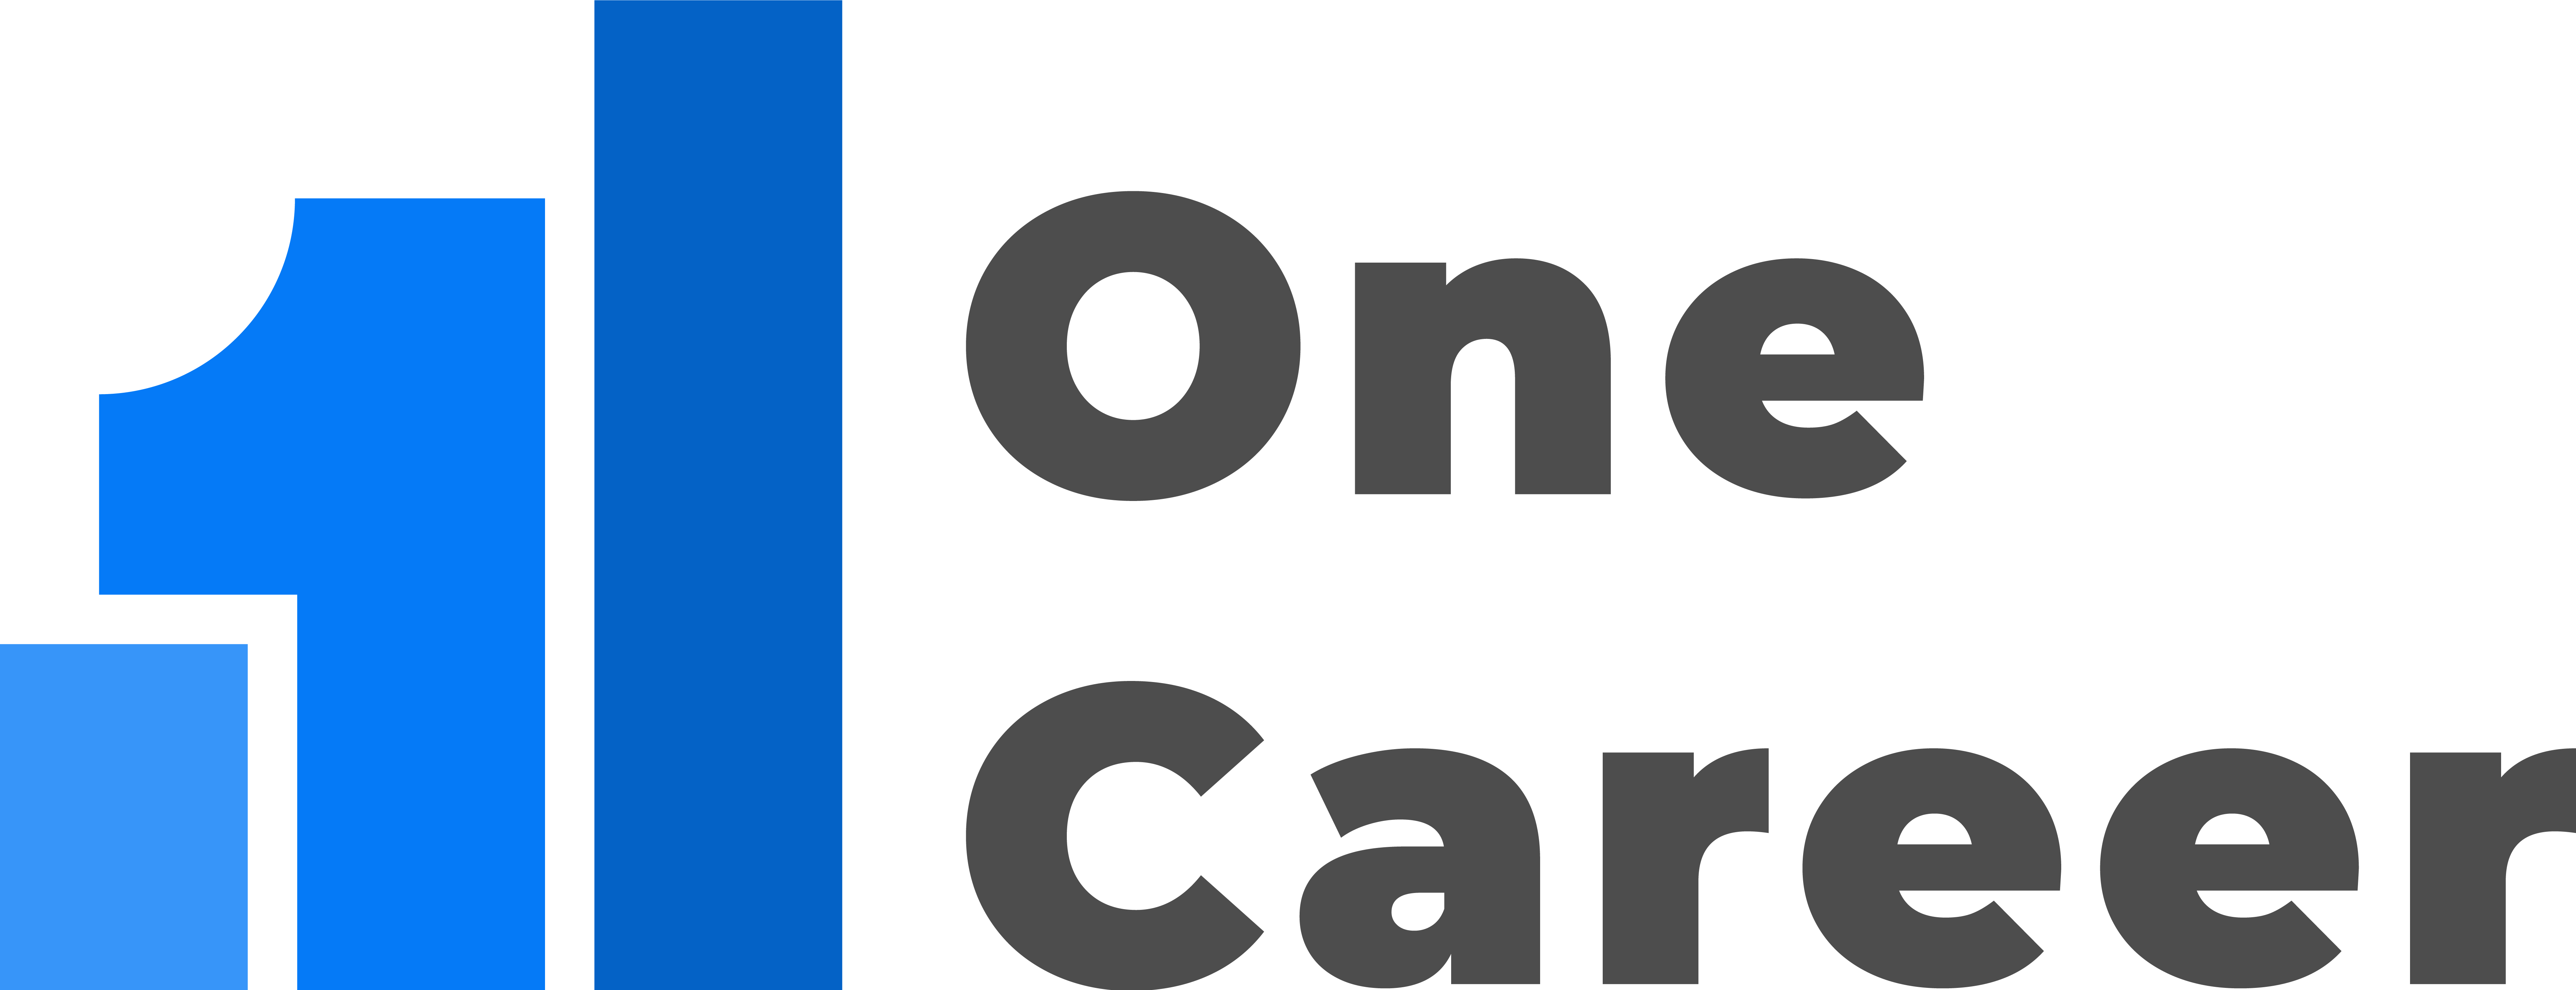 OneCareer App by One Brand Company